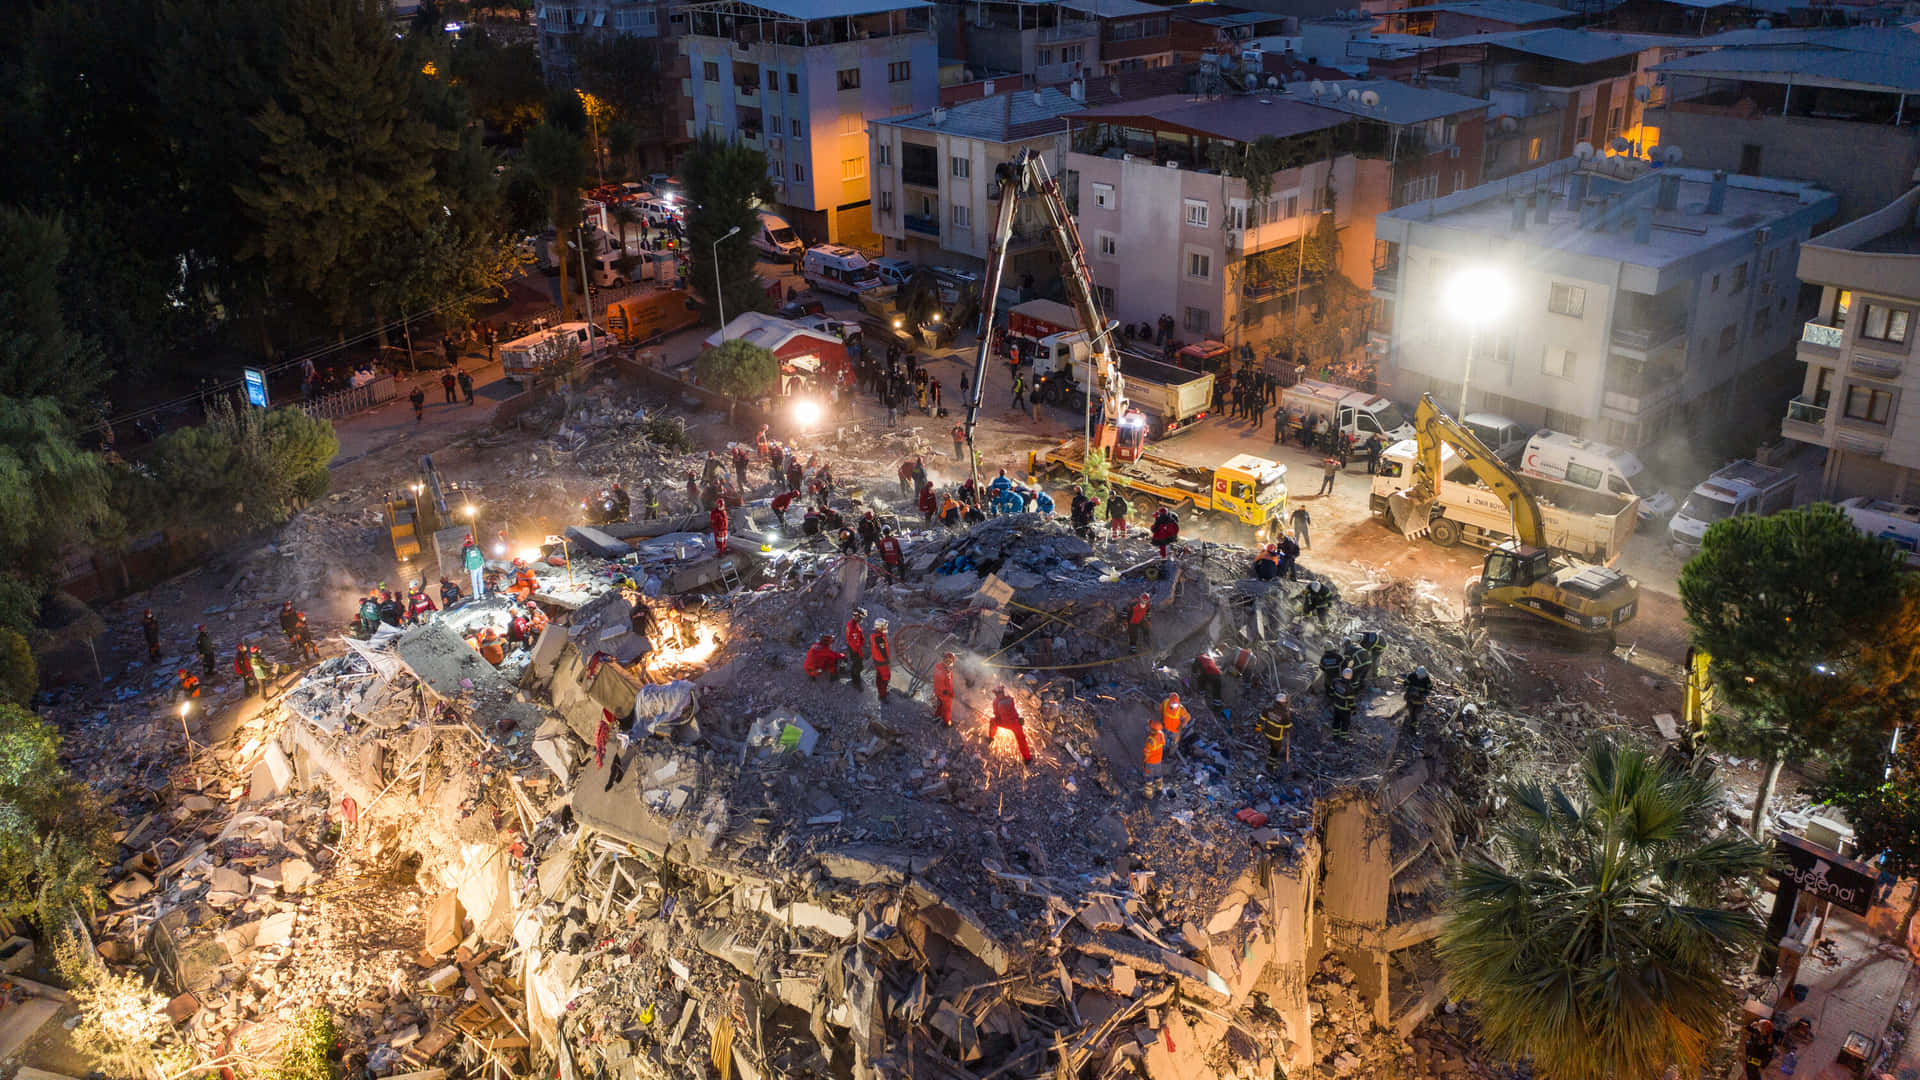 A Large Pile Of Rubble Is Seen In The Night